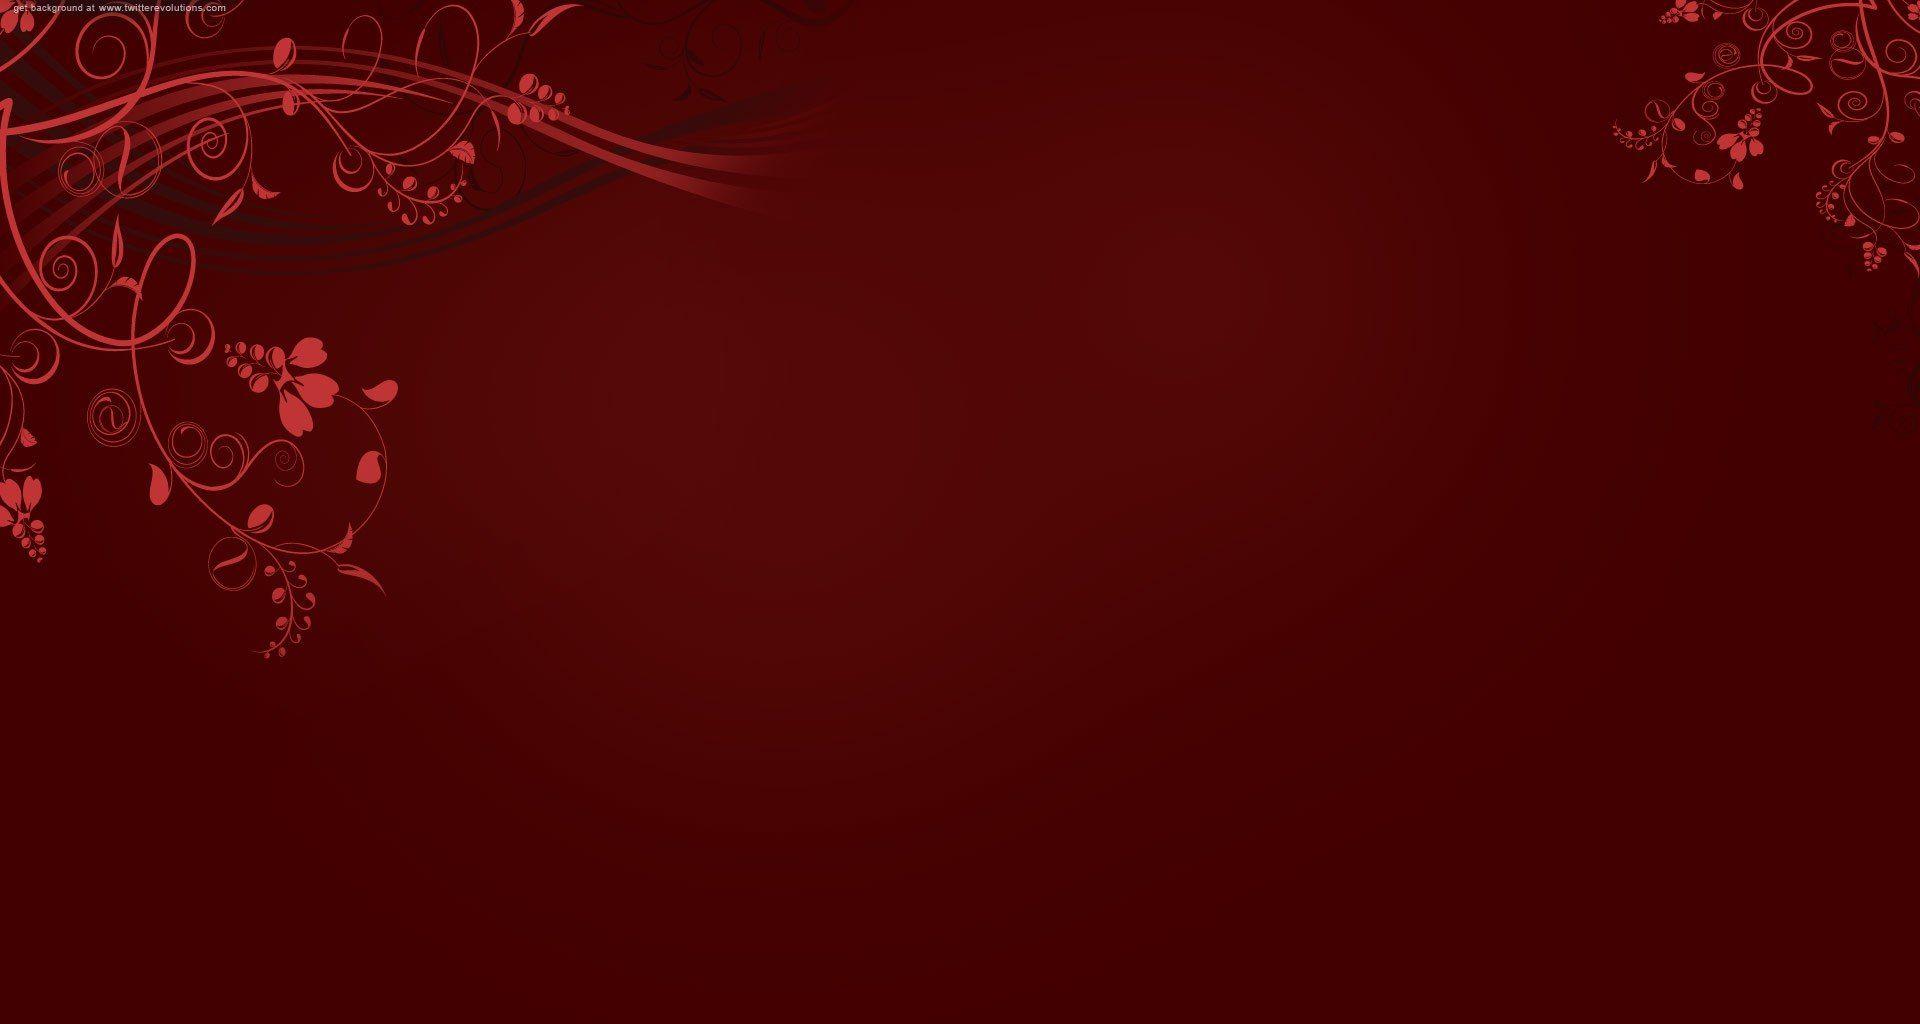 60138 Red Royal Wallpaper Images Stock Photos  Vectors  Shutterstock